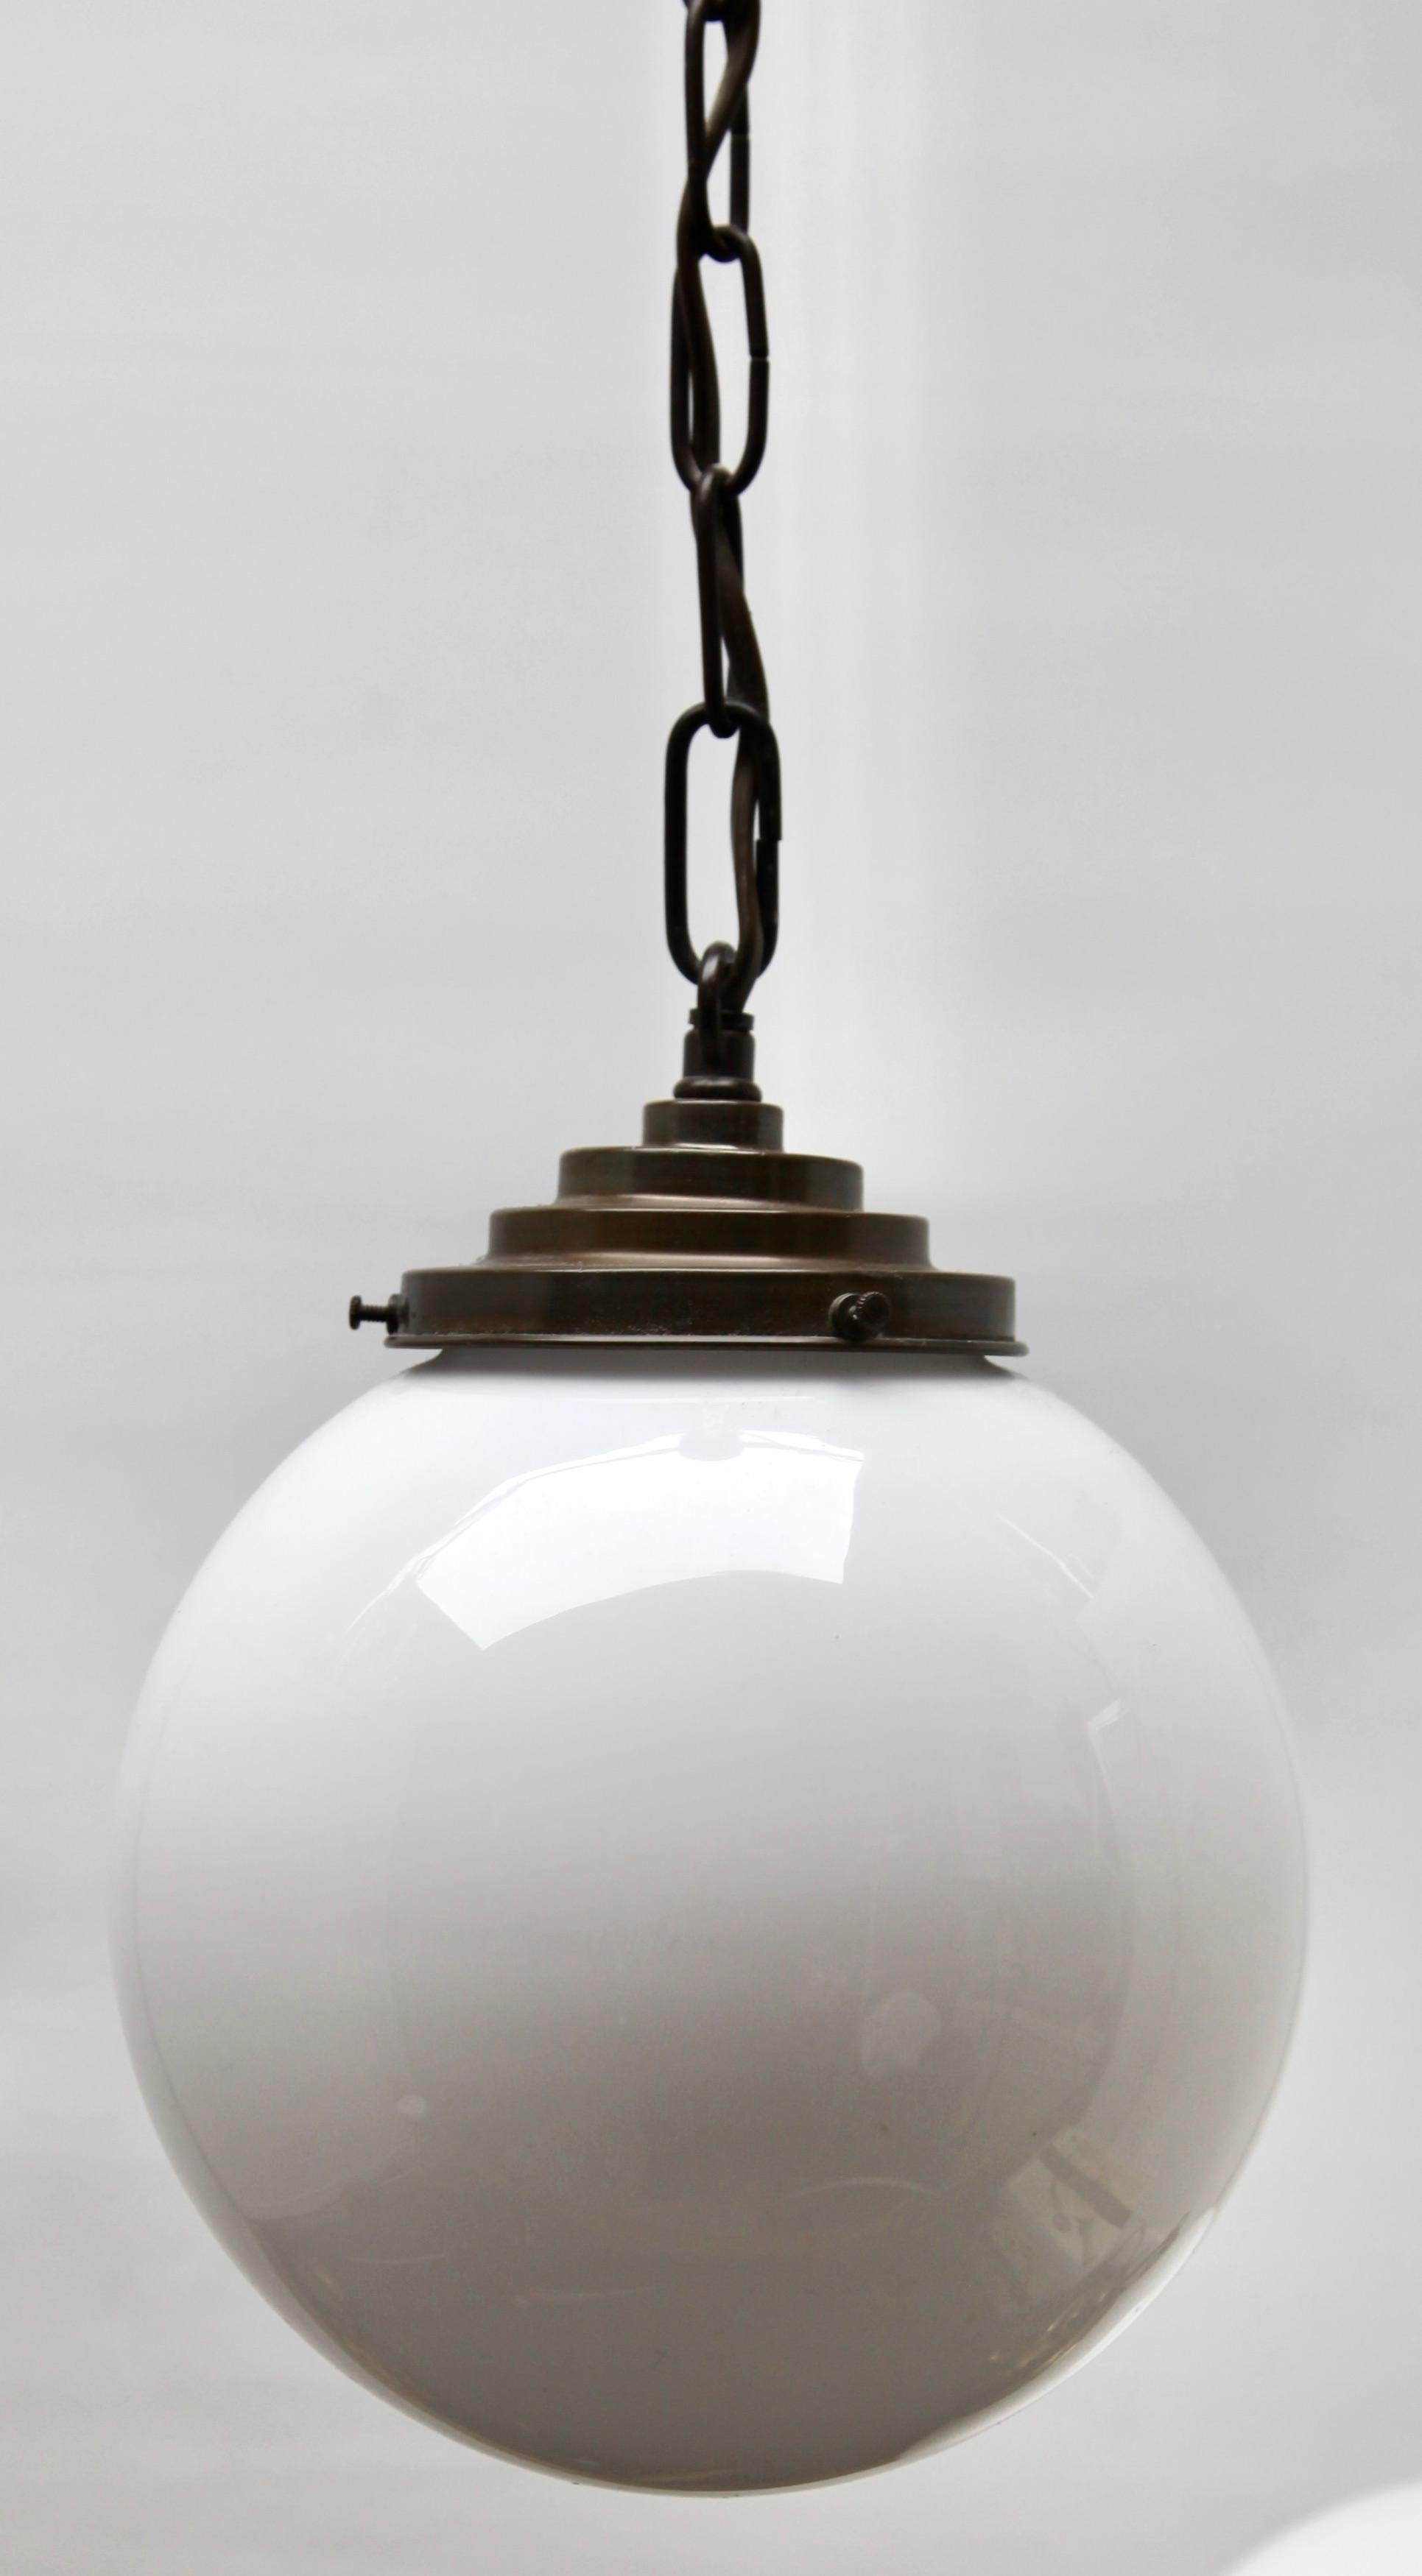 Brass Pendant Lamp with a Opaline Shade, 1930s, Netherlands For Sale